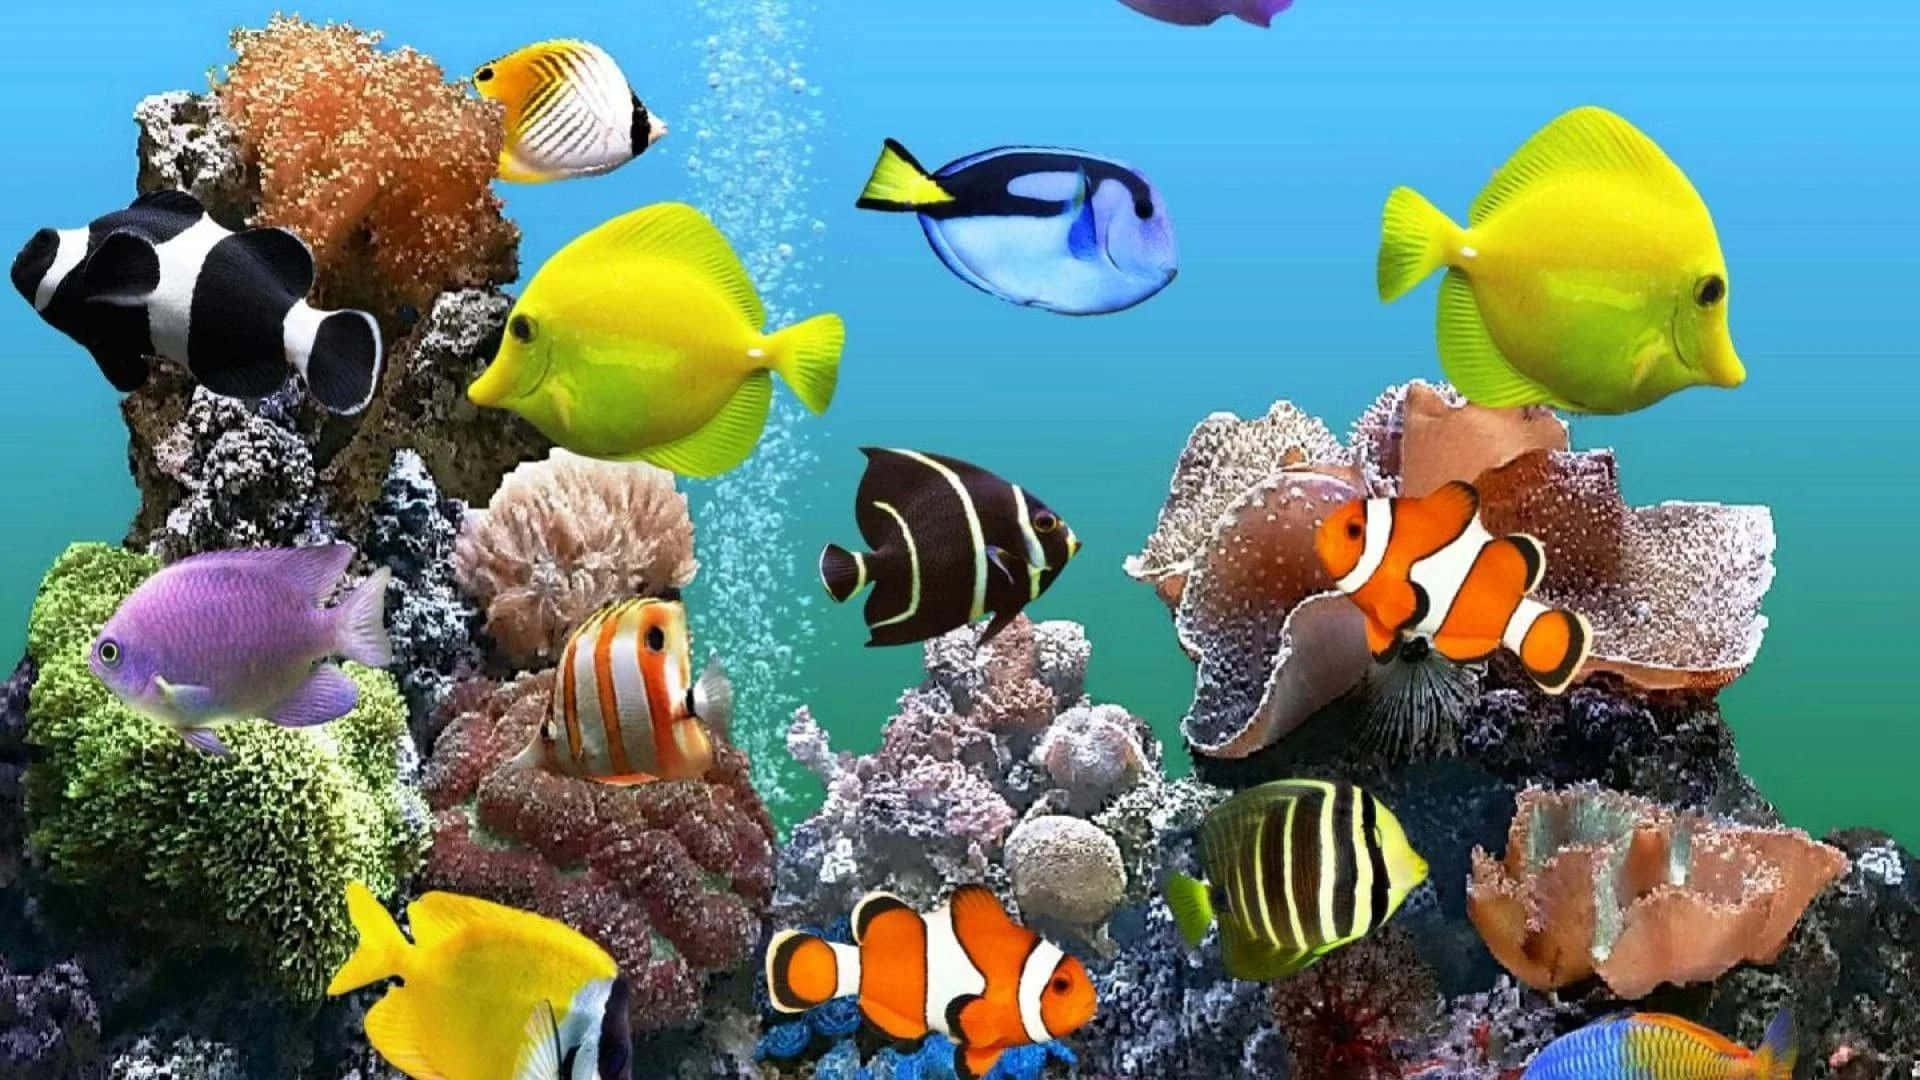 Enjoy the Cool Aquatic World with the 3D Fish Tank